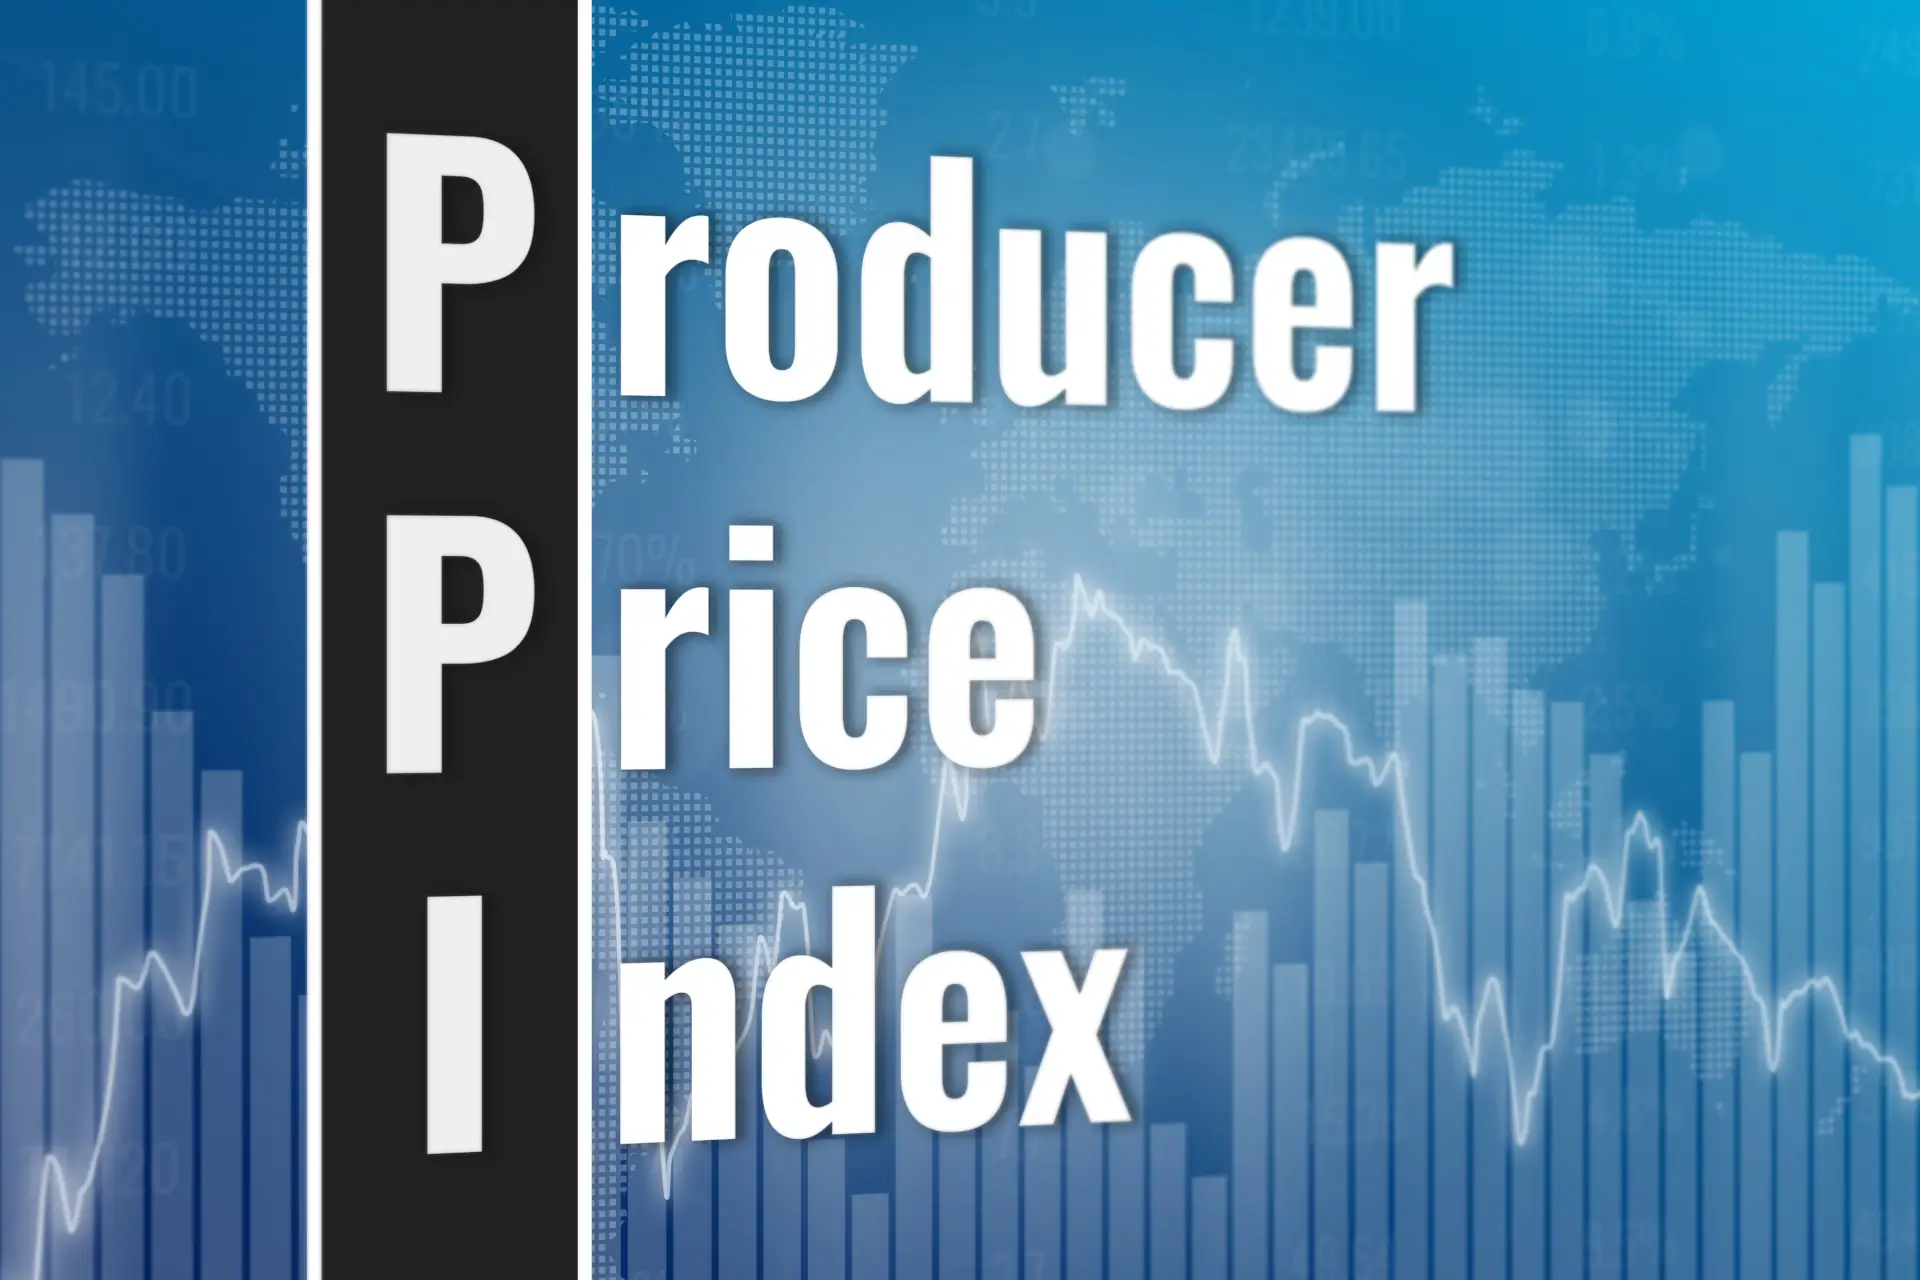 Producer Price Index (PPI)